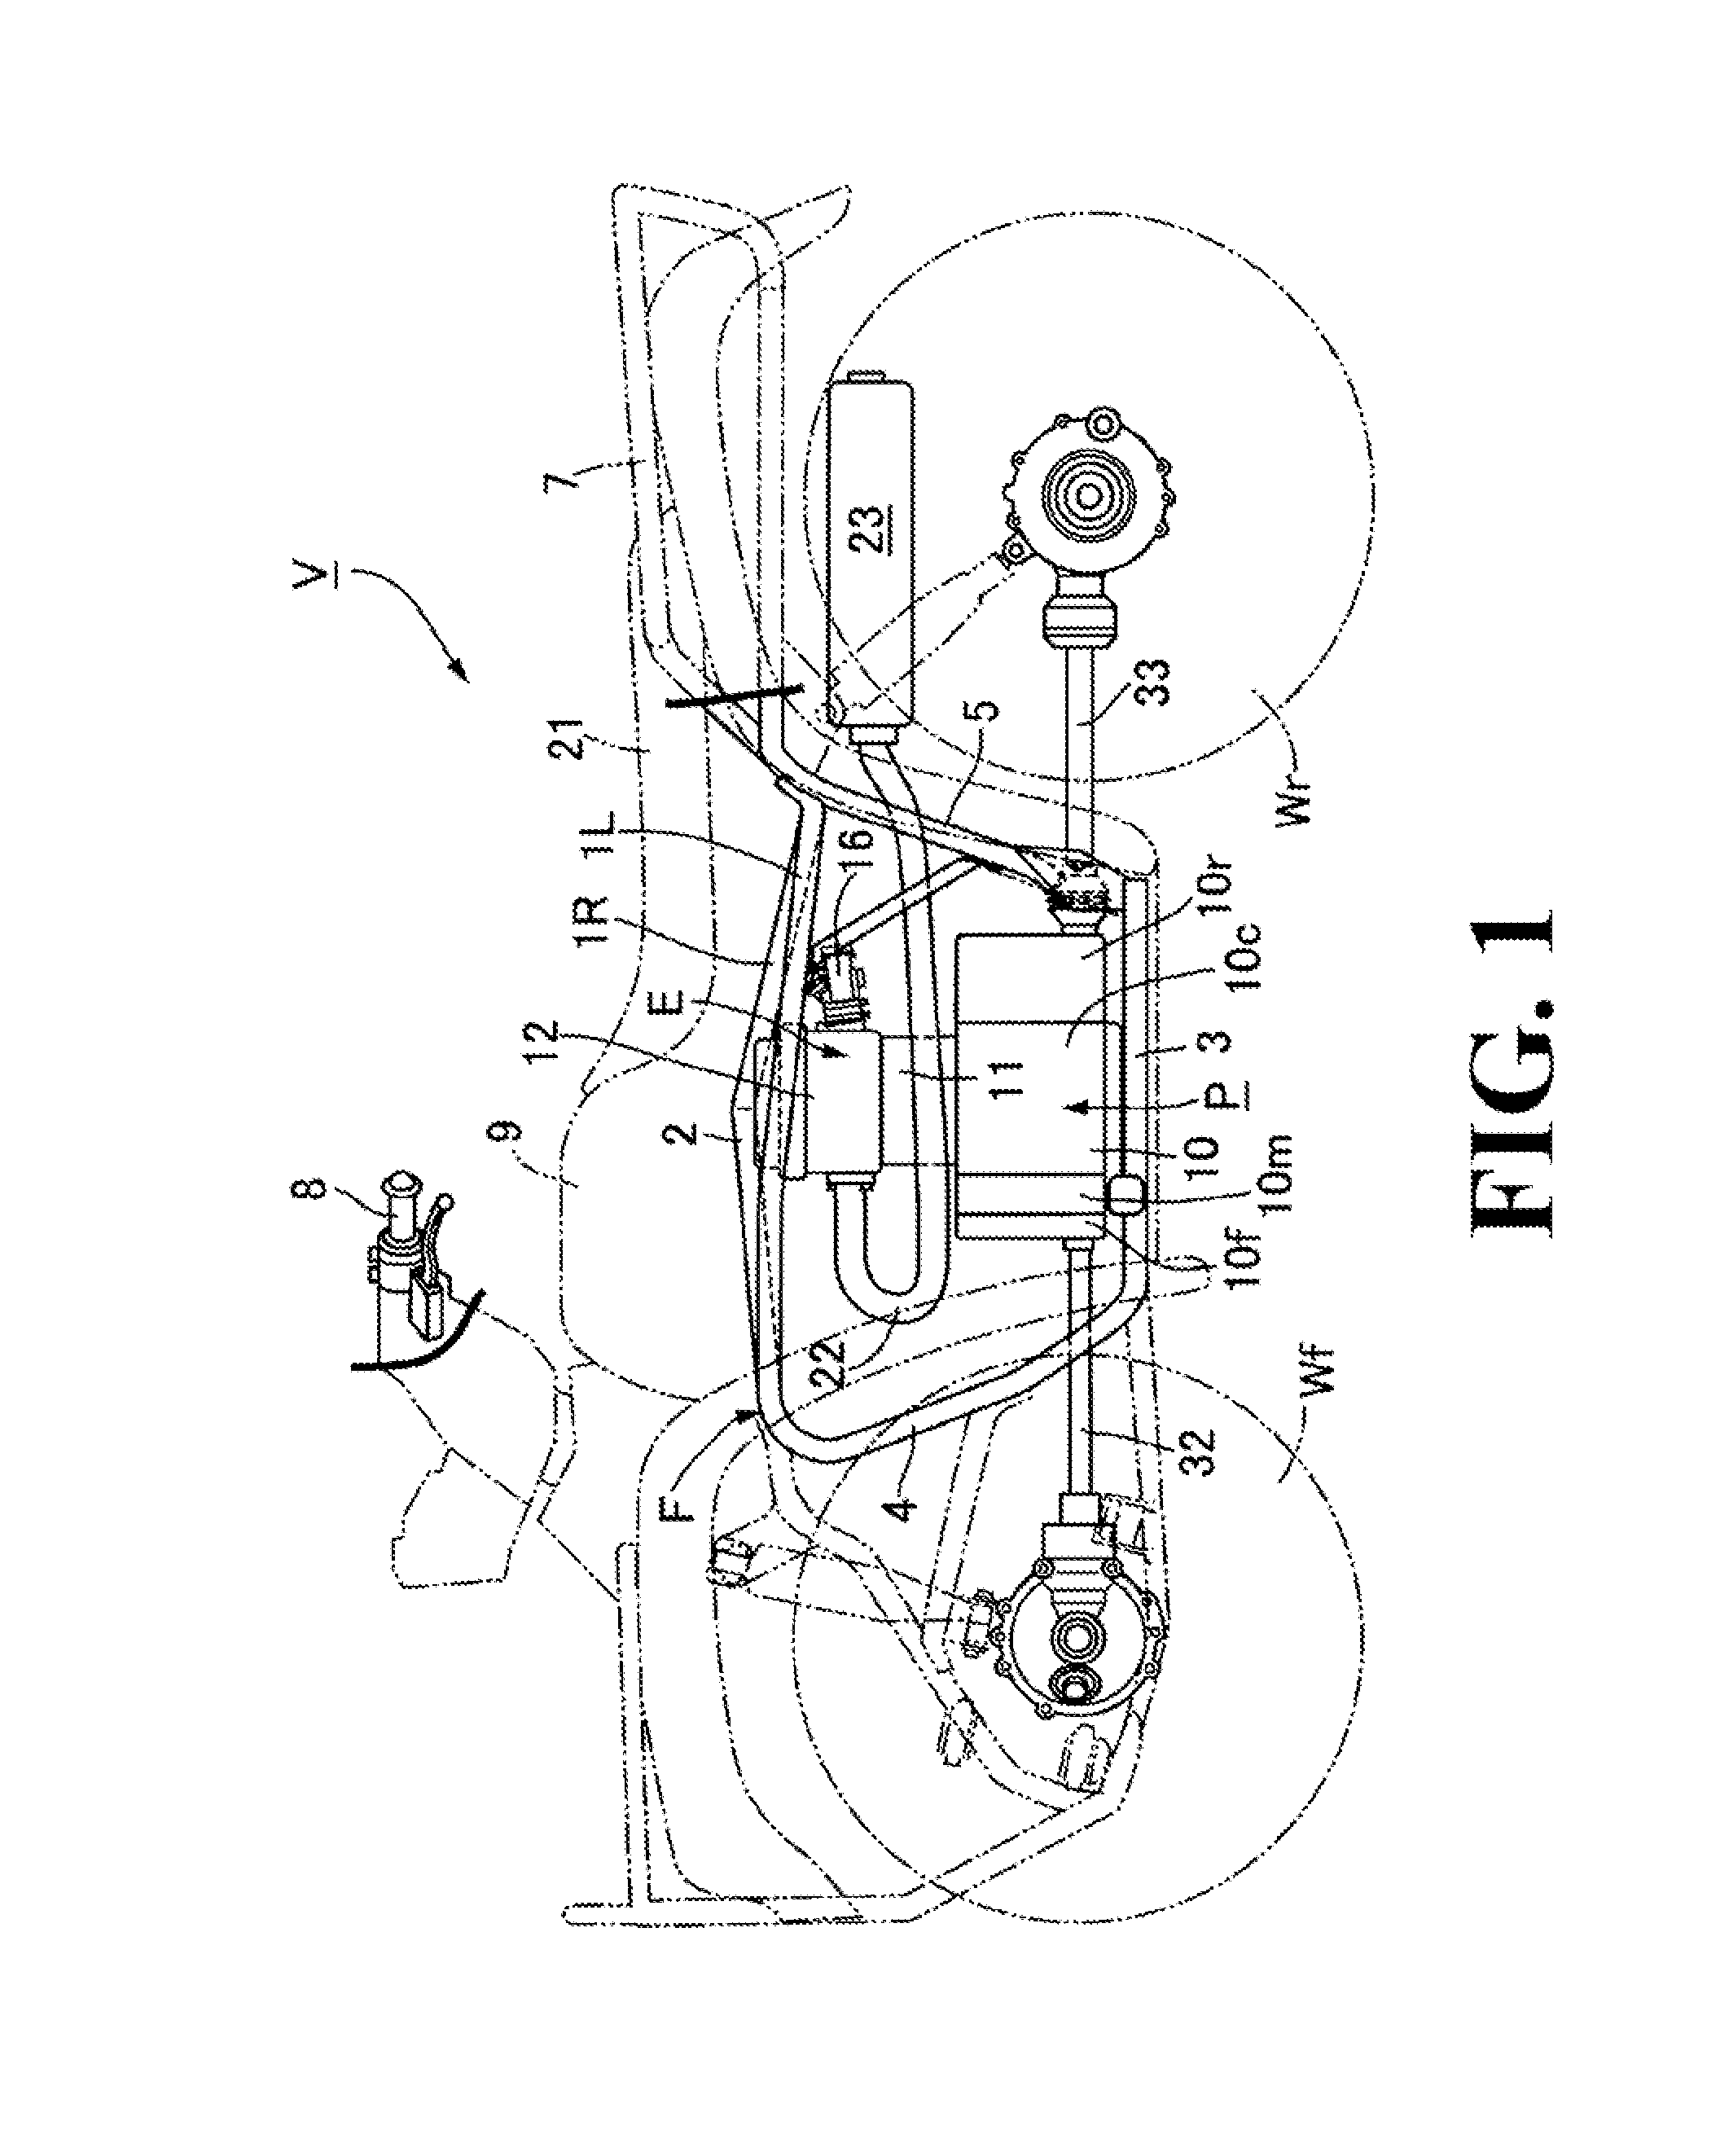 Lubricating device for power unit